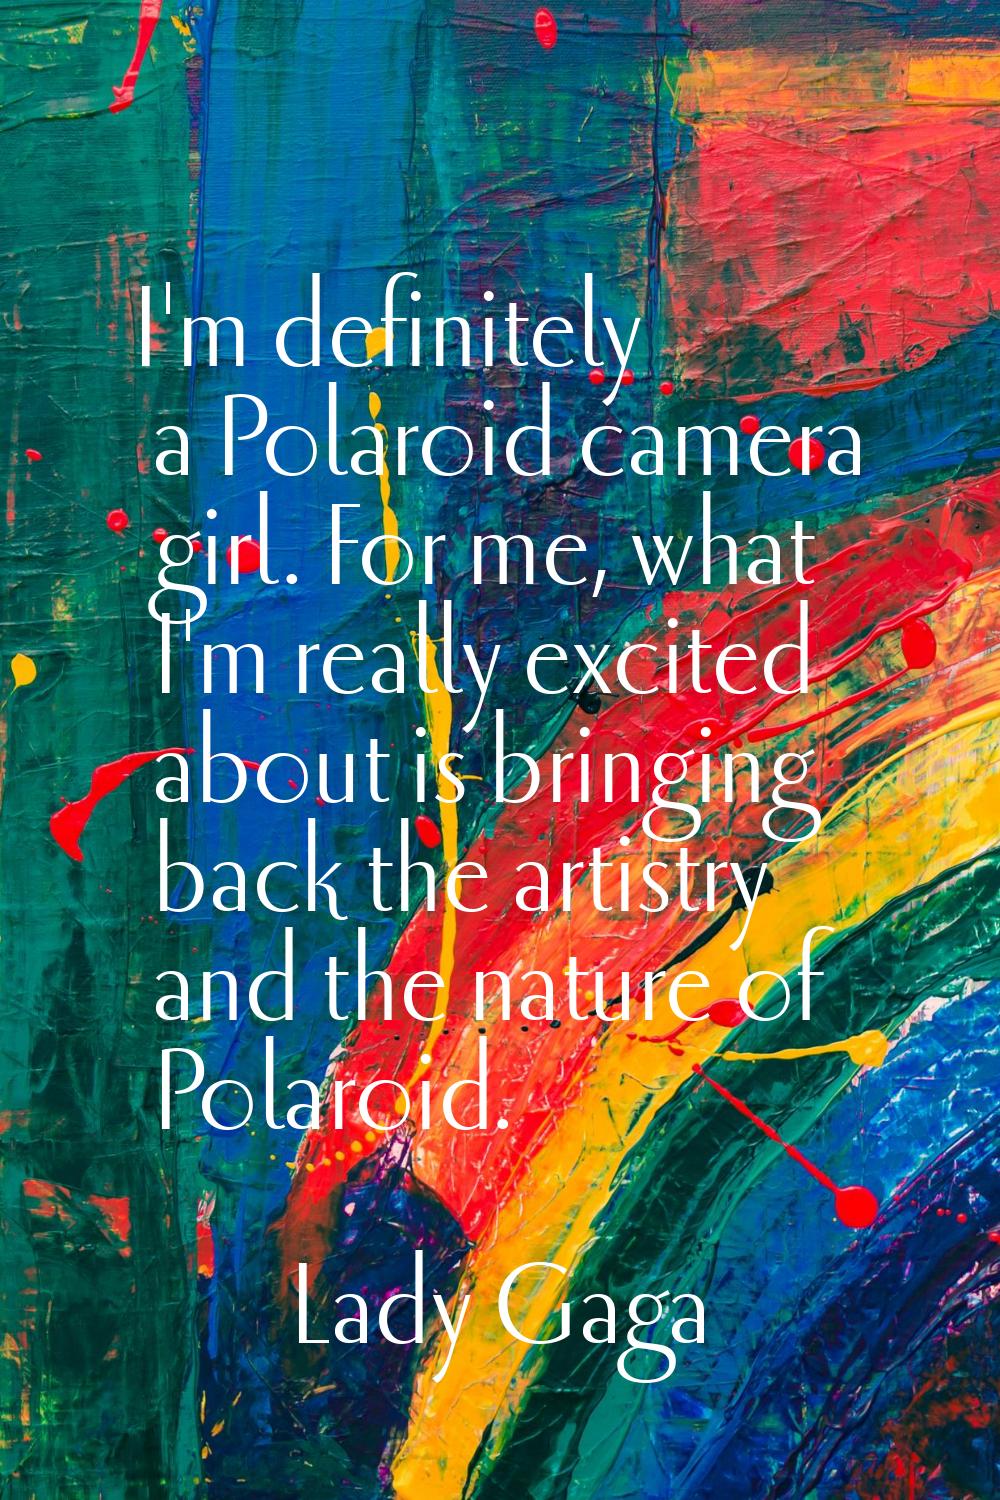 I'm definitely a Polaroid camera girl. For me, what I'm really excited about is bringing back the a